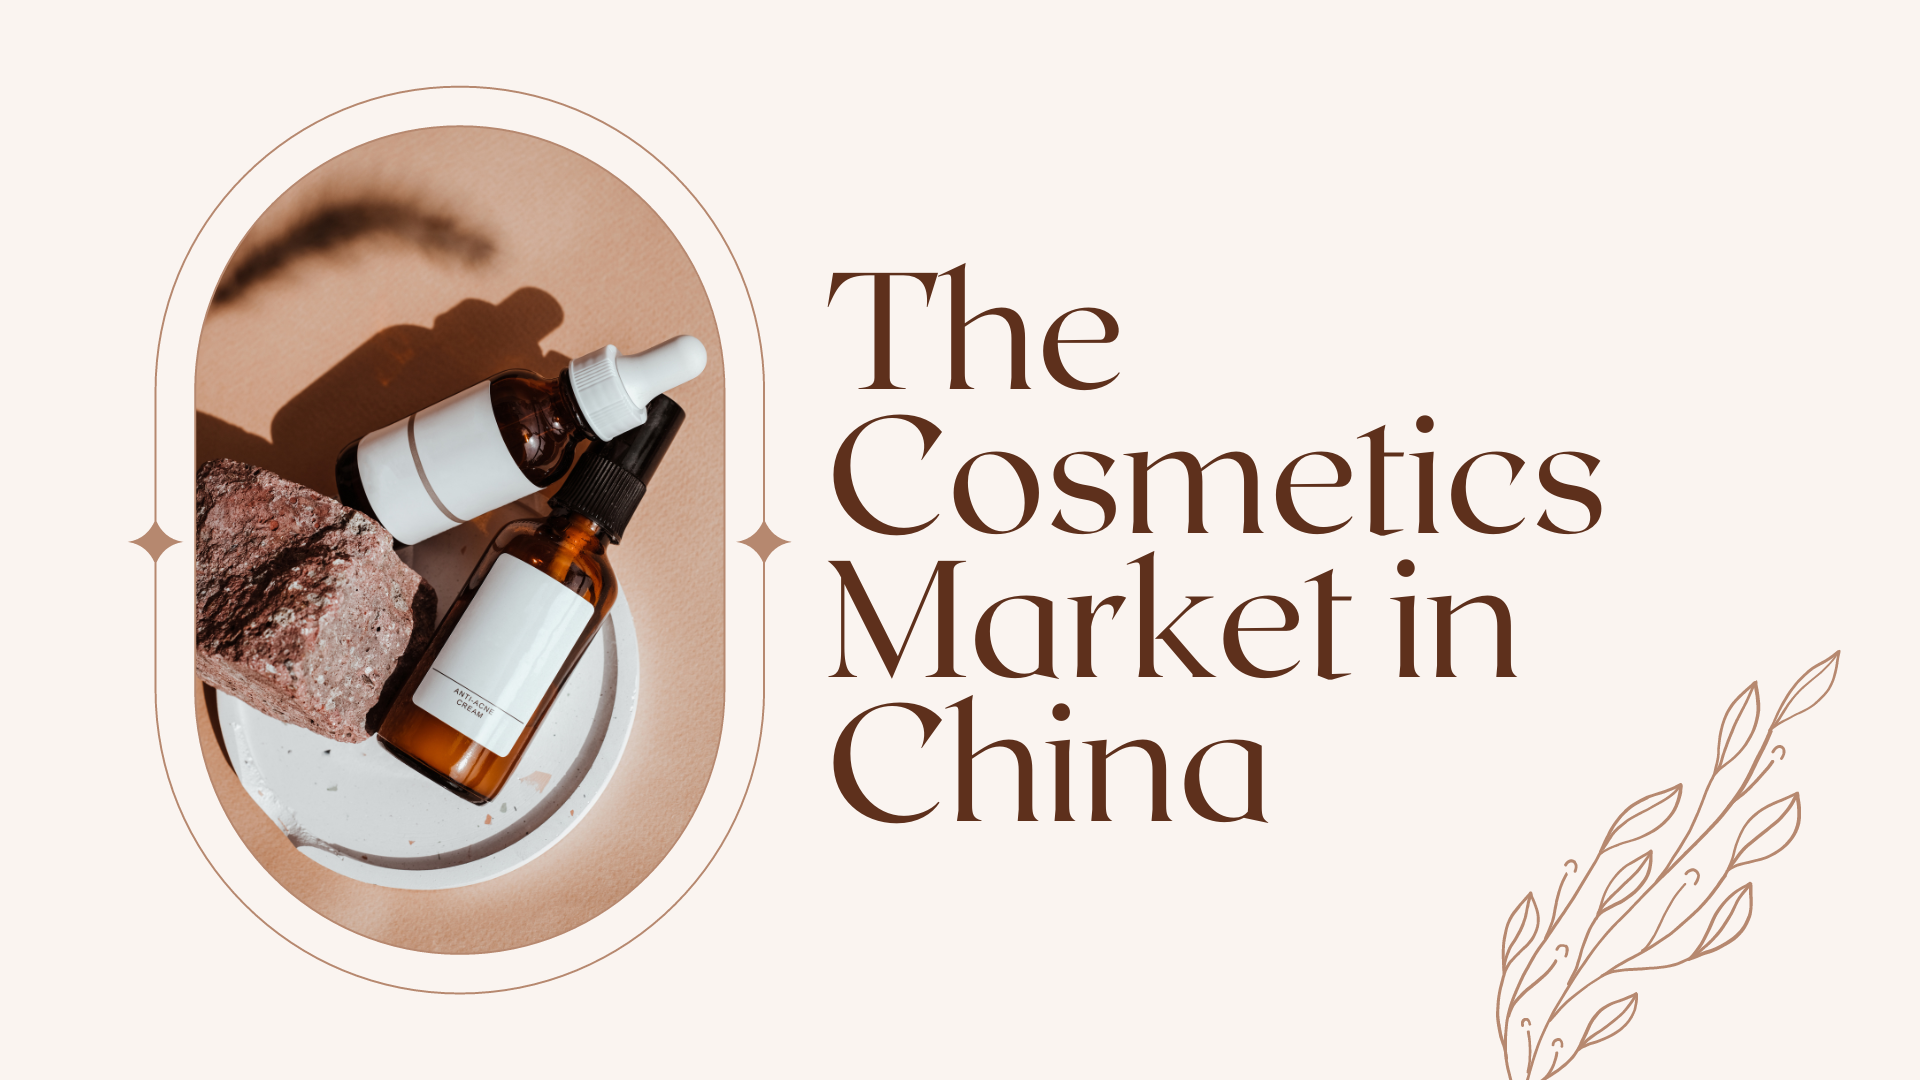 A Marketer's Glimpse: China's Cosmetics Industry